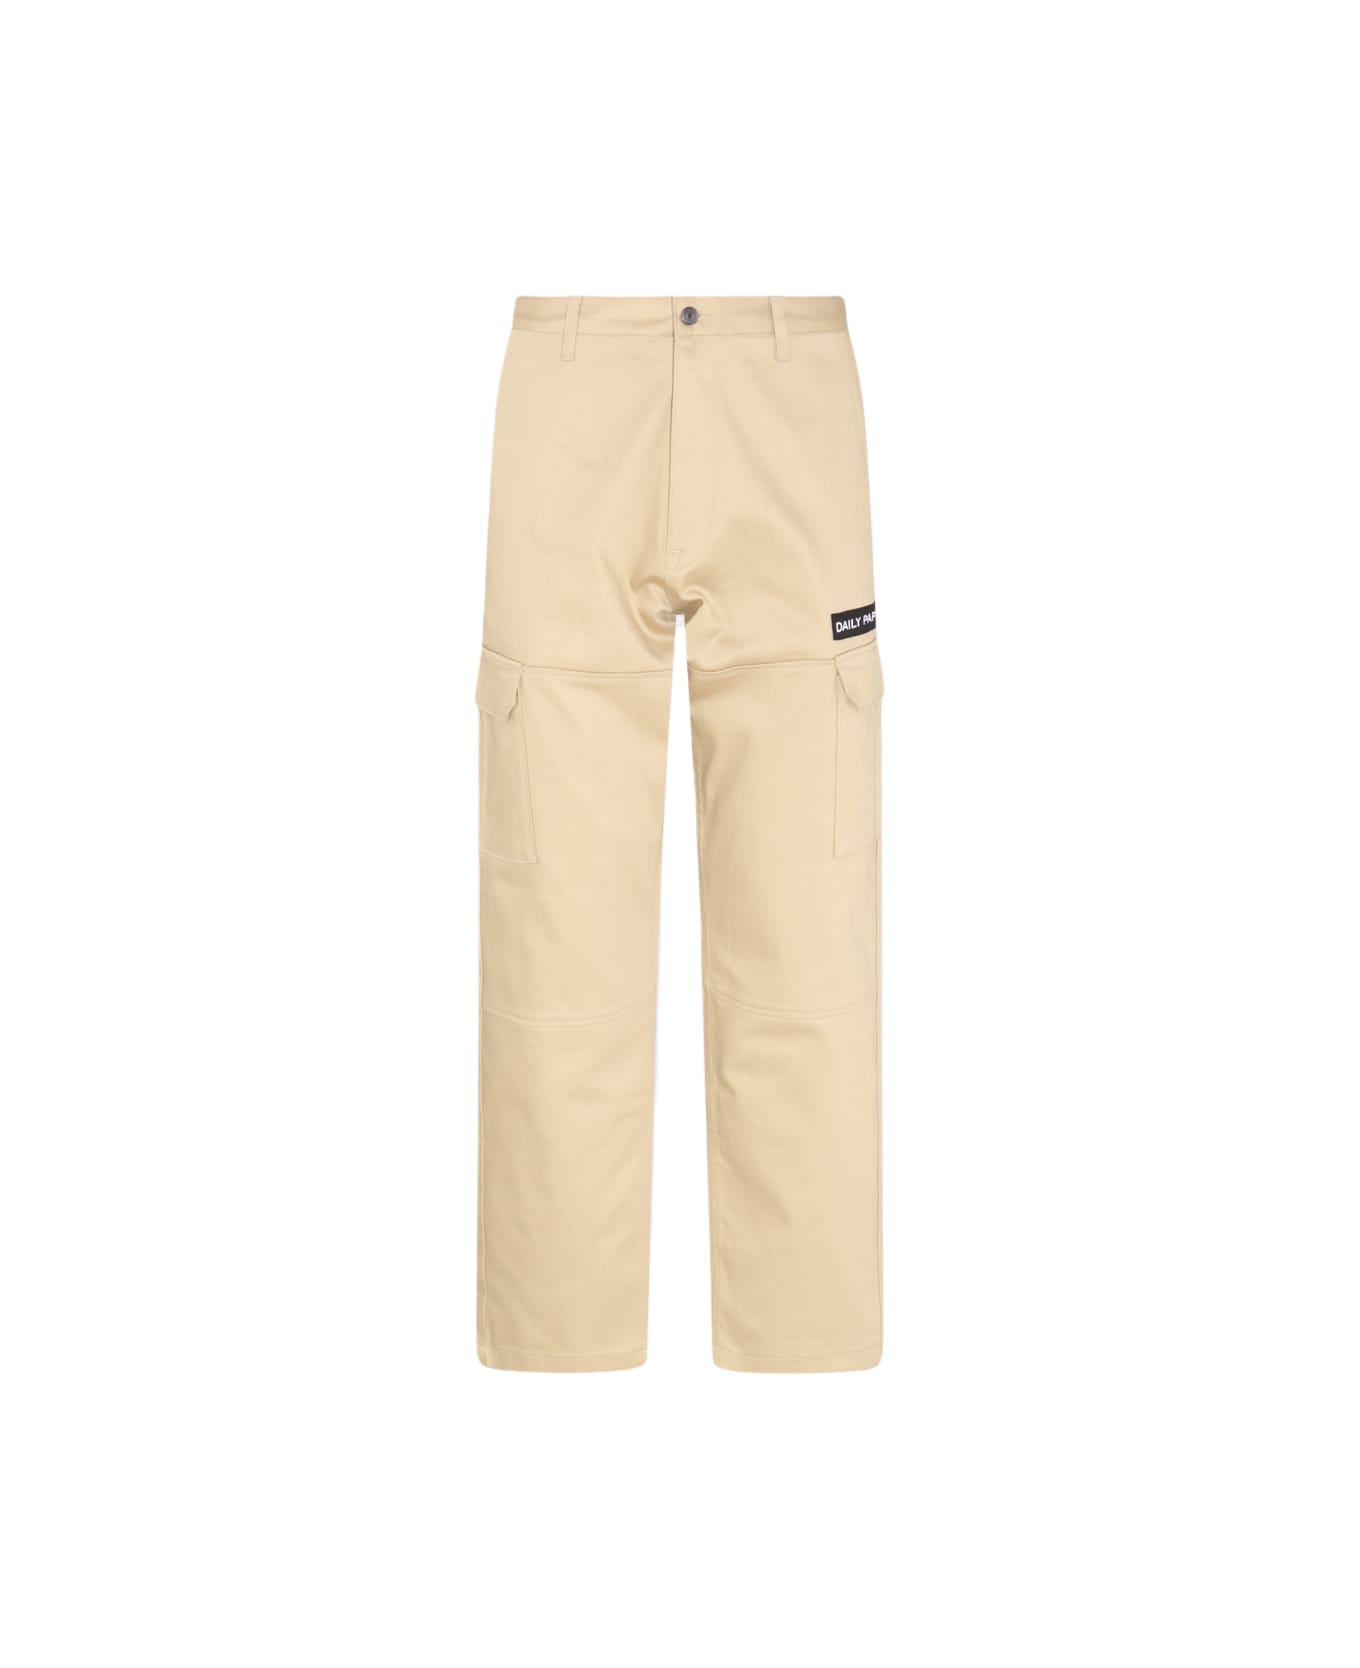 Daily Paper Beige Cotton Pants - TWILL BEIGE ボトムス